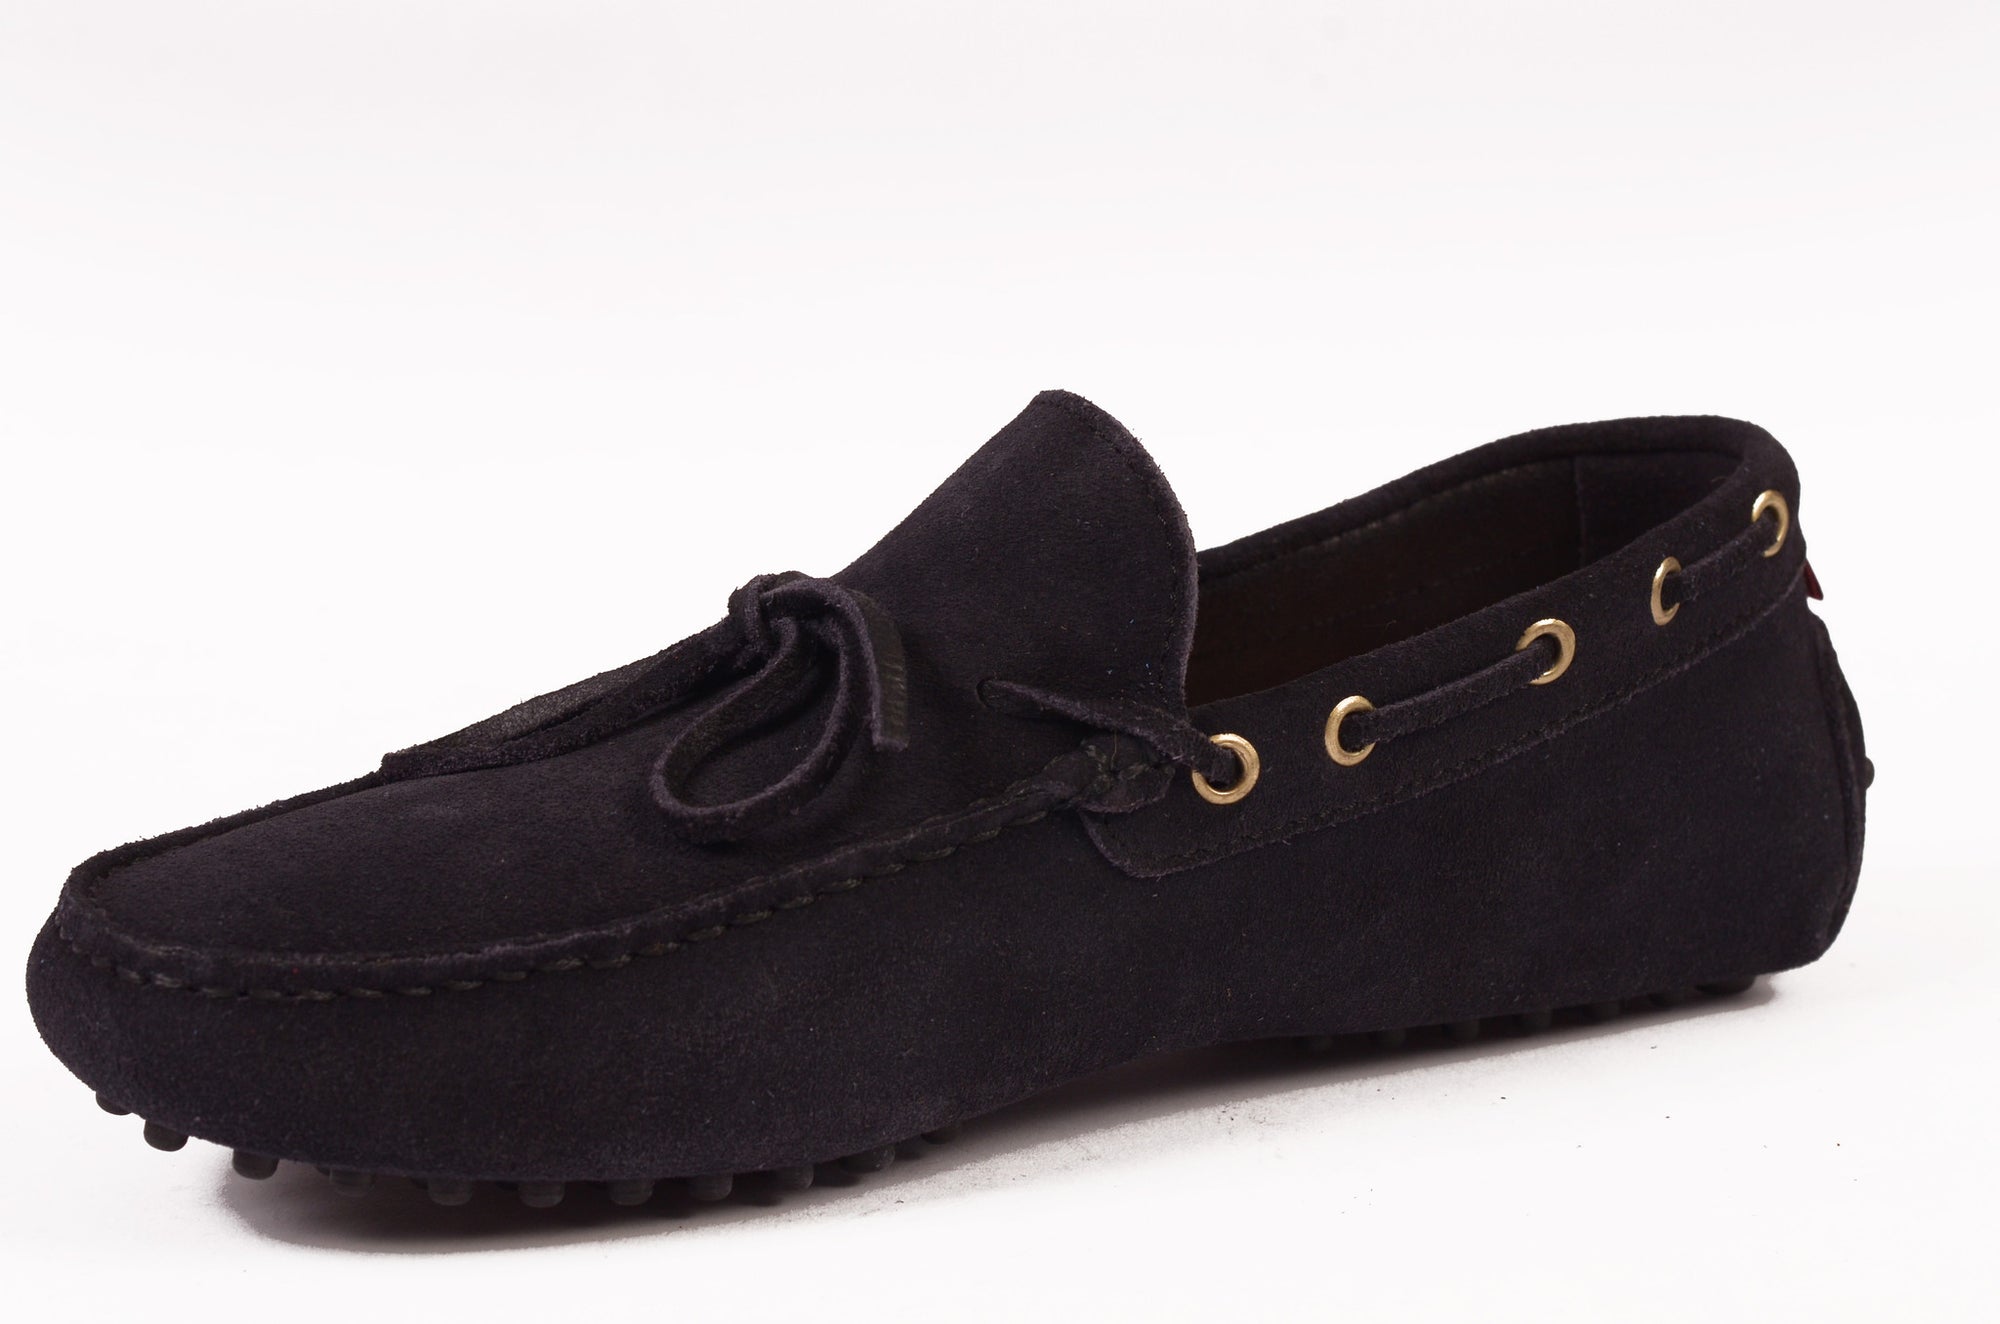 KITON NAPOLI Navy Blue Suede Loafers Driving Car Shoes Moccasins NEW